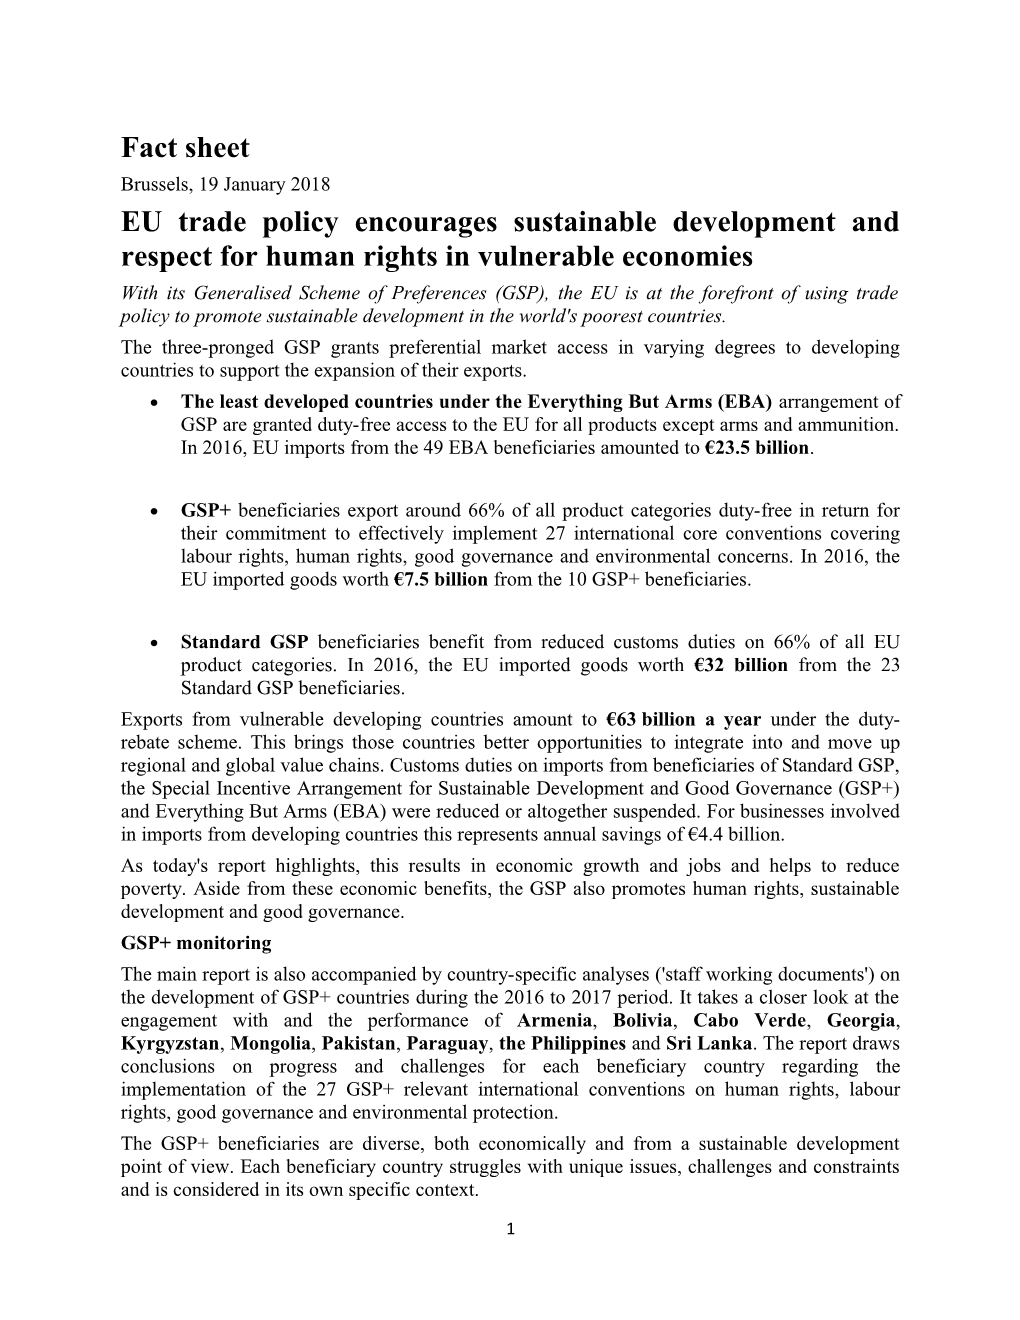 EU Trade Policy Encouragessustainable Development and Respect for Human Rights in Vulnerable